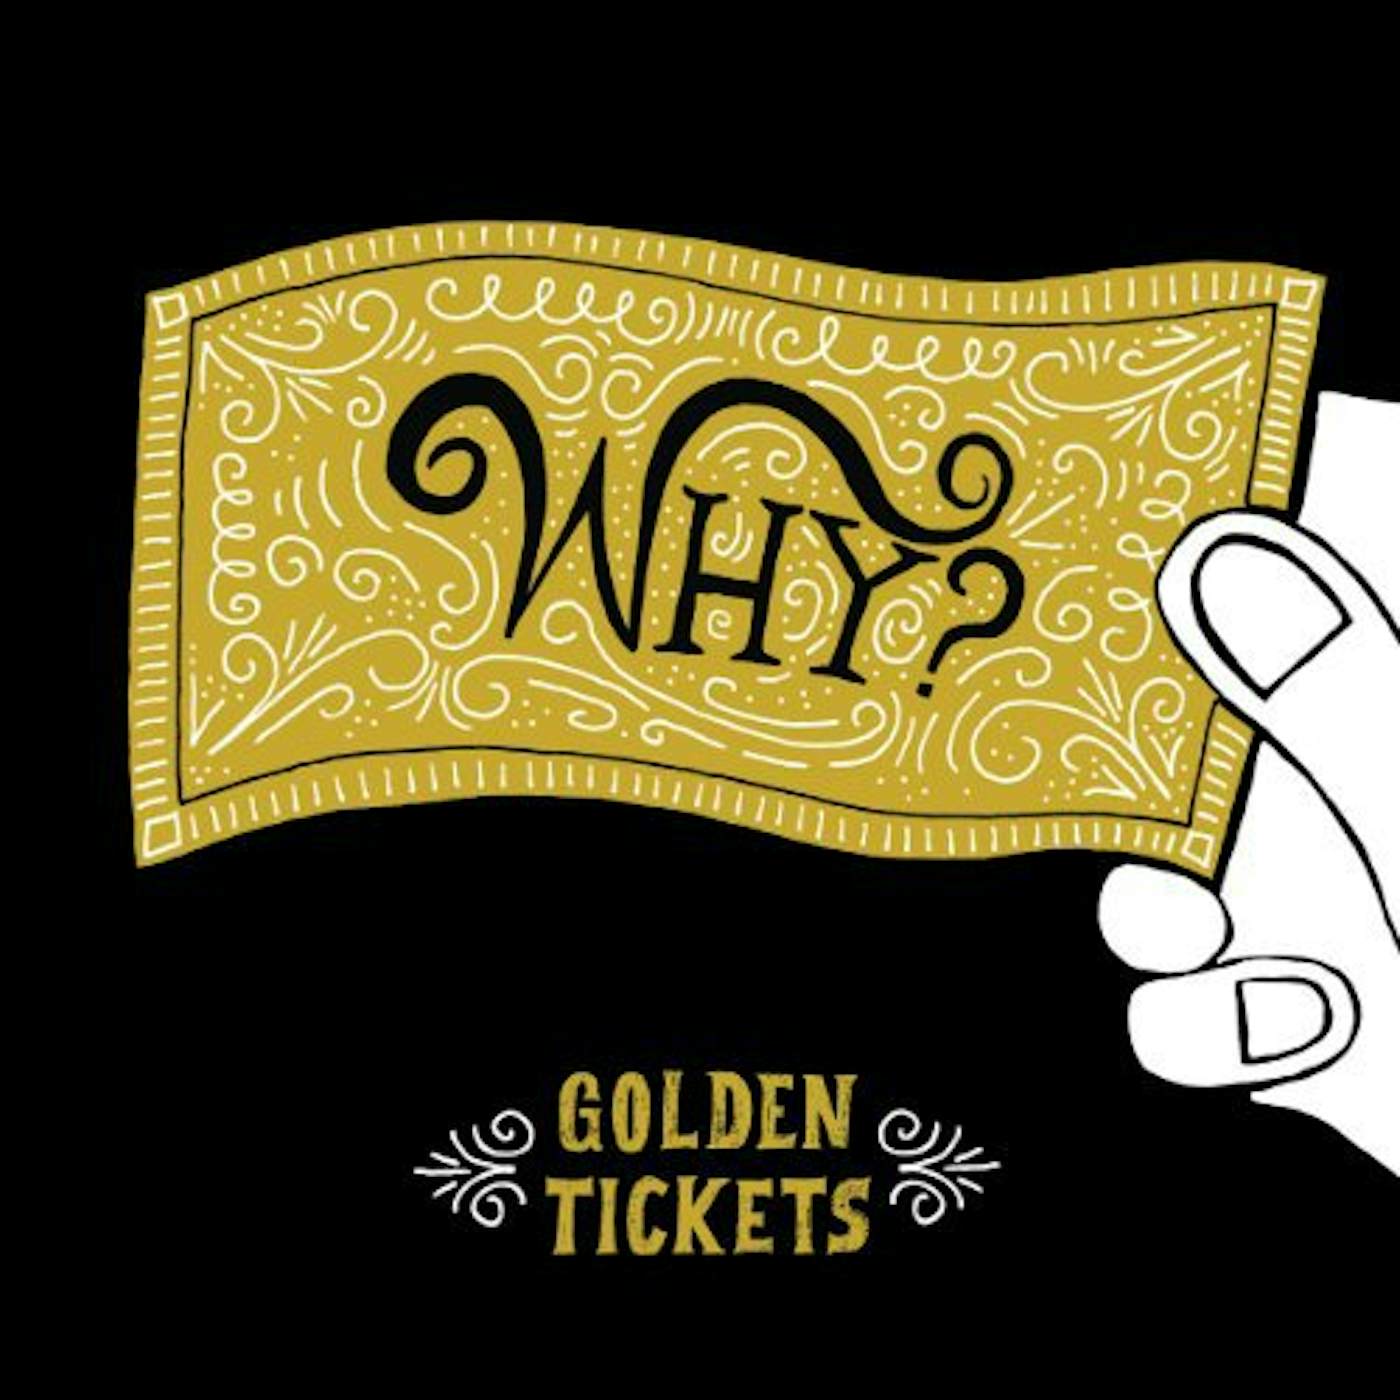 Why Golden Tickets Vinyl Record